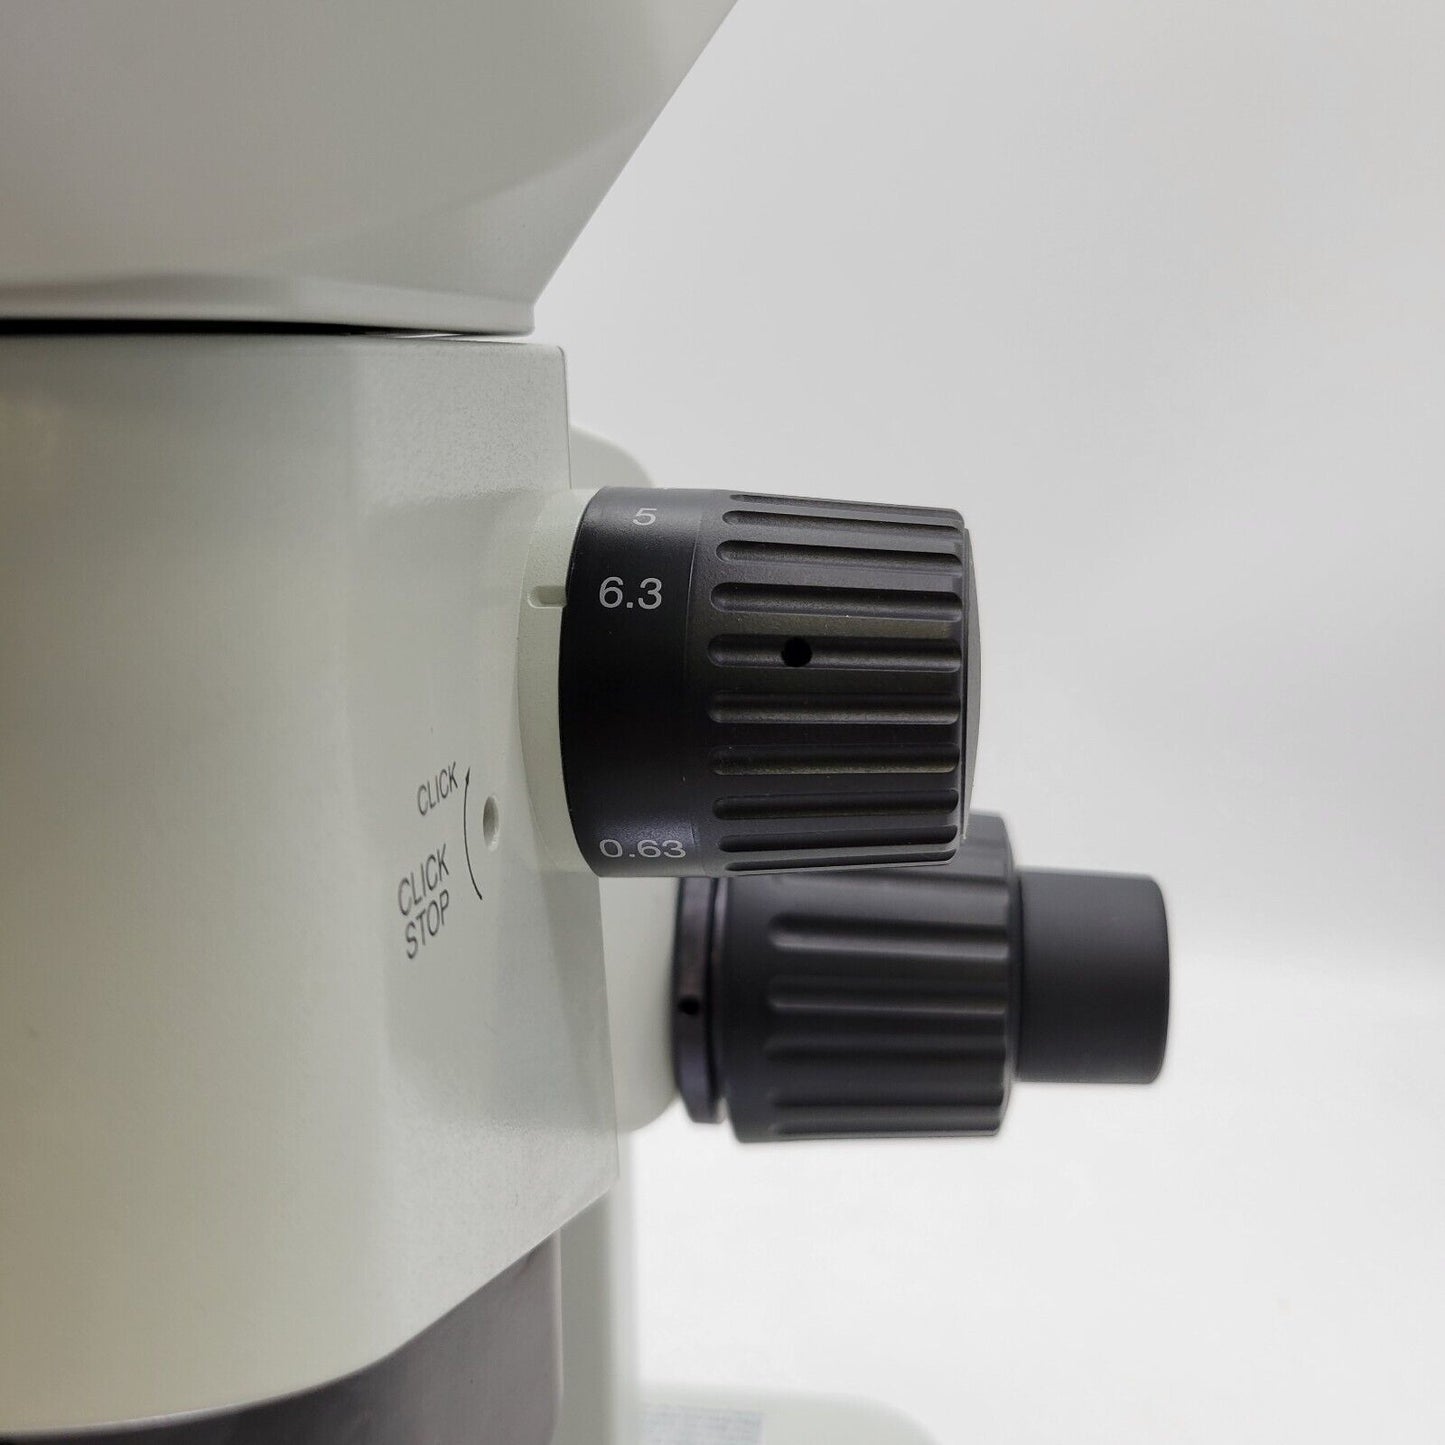 Olympus Stereo Microscope SZX10 w. Slim LED Transmitted Light Base BF/DF/Oblique - microscopemarketplace